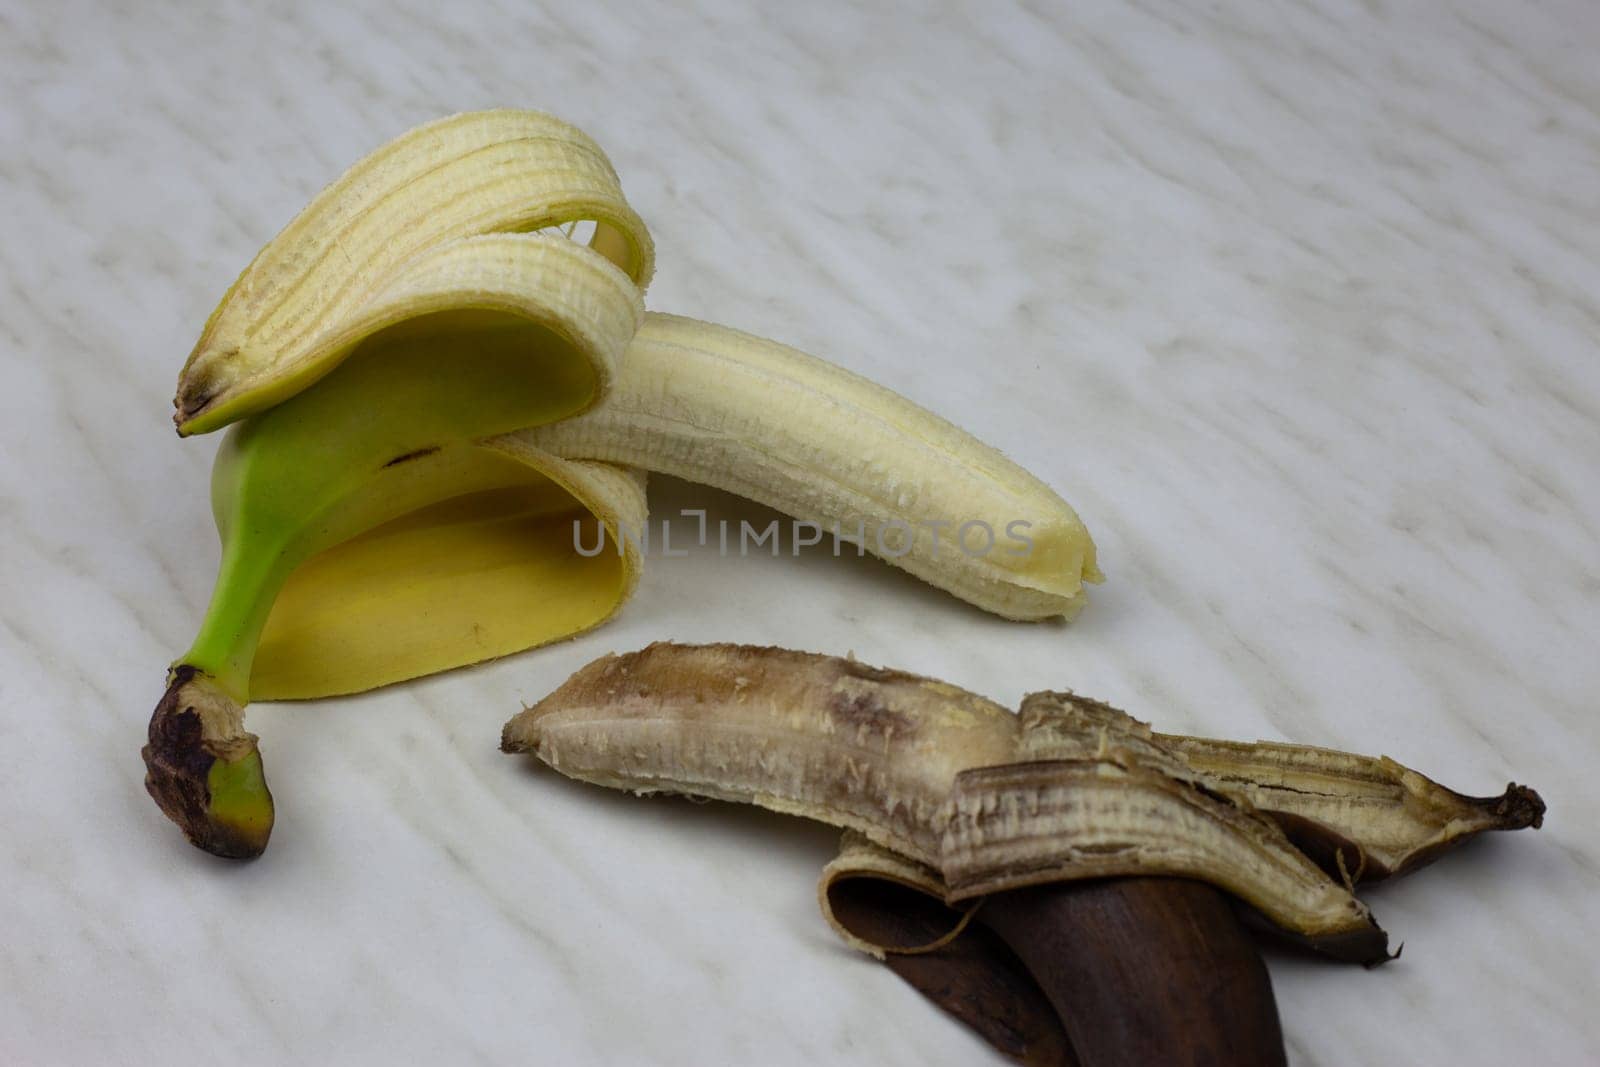 Juicy fresh banana fruit in open yellow peel next to rotten expired banana on white table, ugly brown banana not edible with fresh fruit